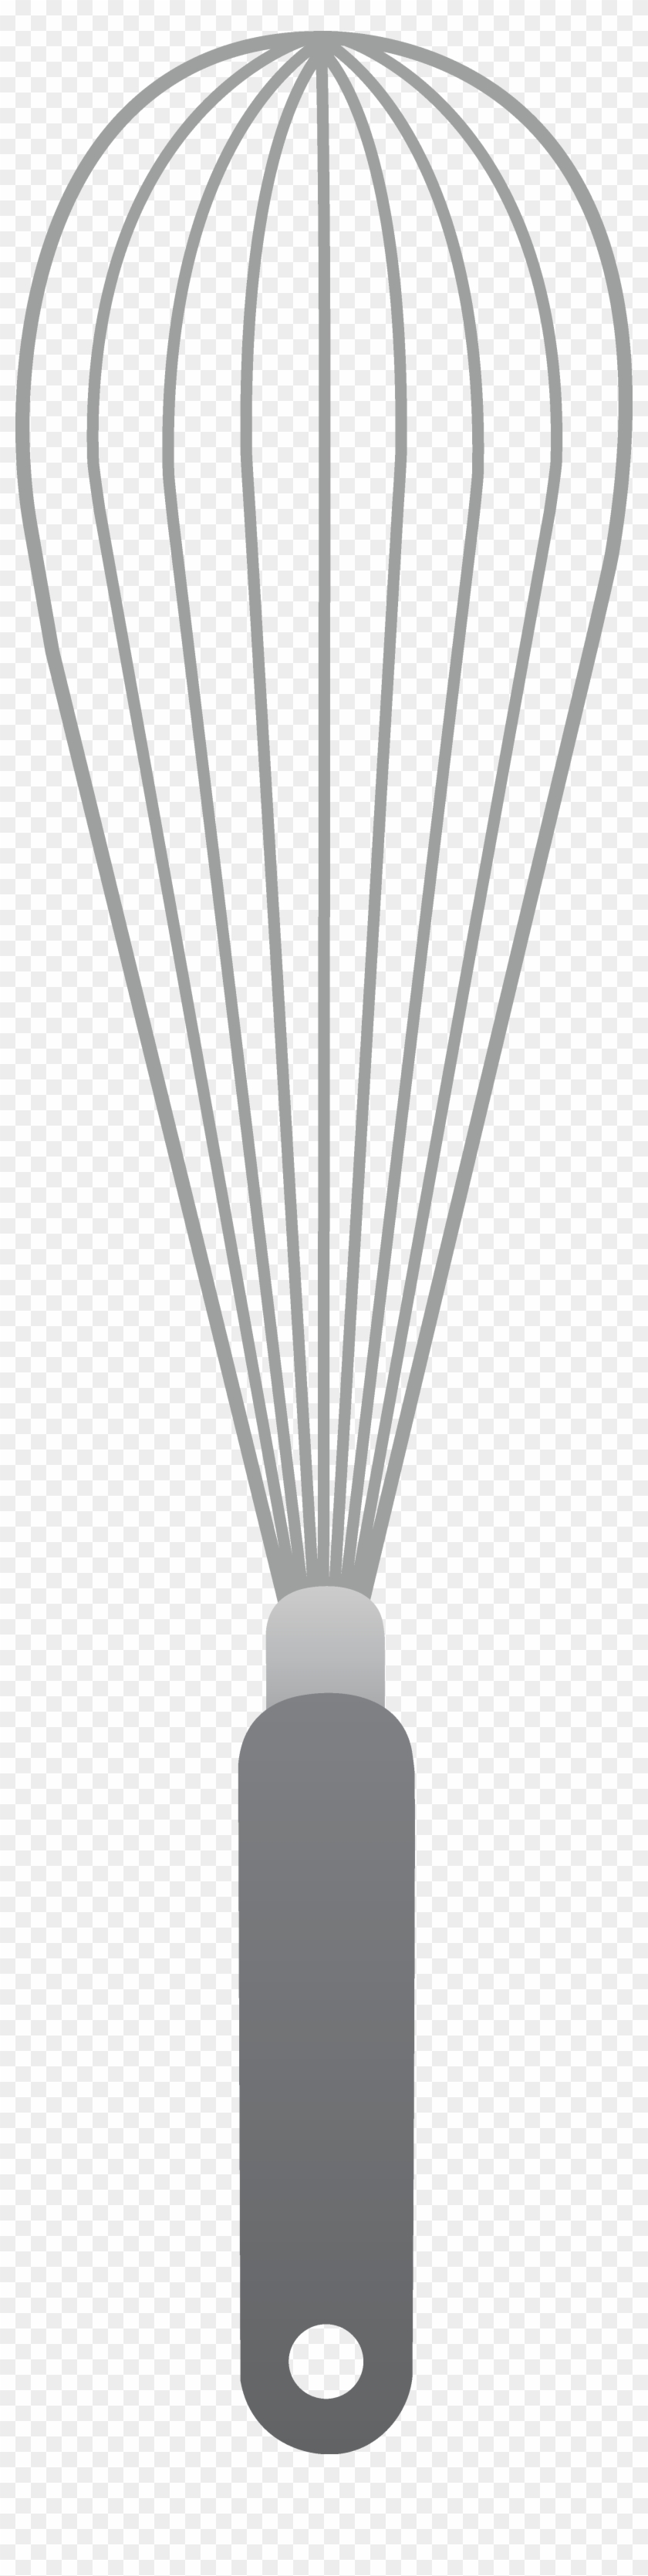 2008 X 7891 20 - Whisk Clip Art Free - Png Download #1567992